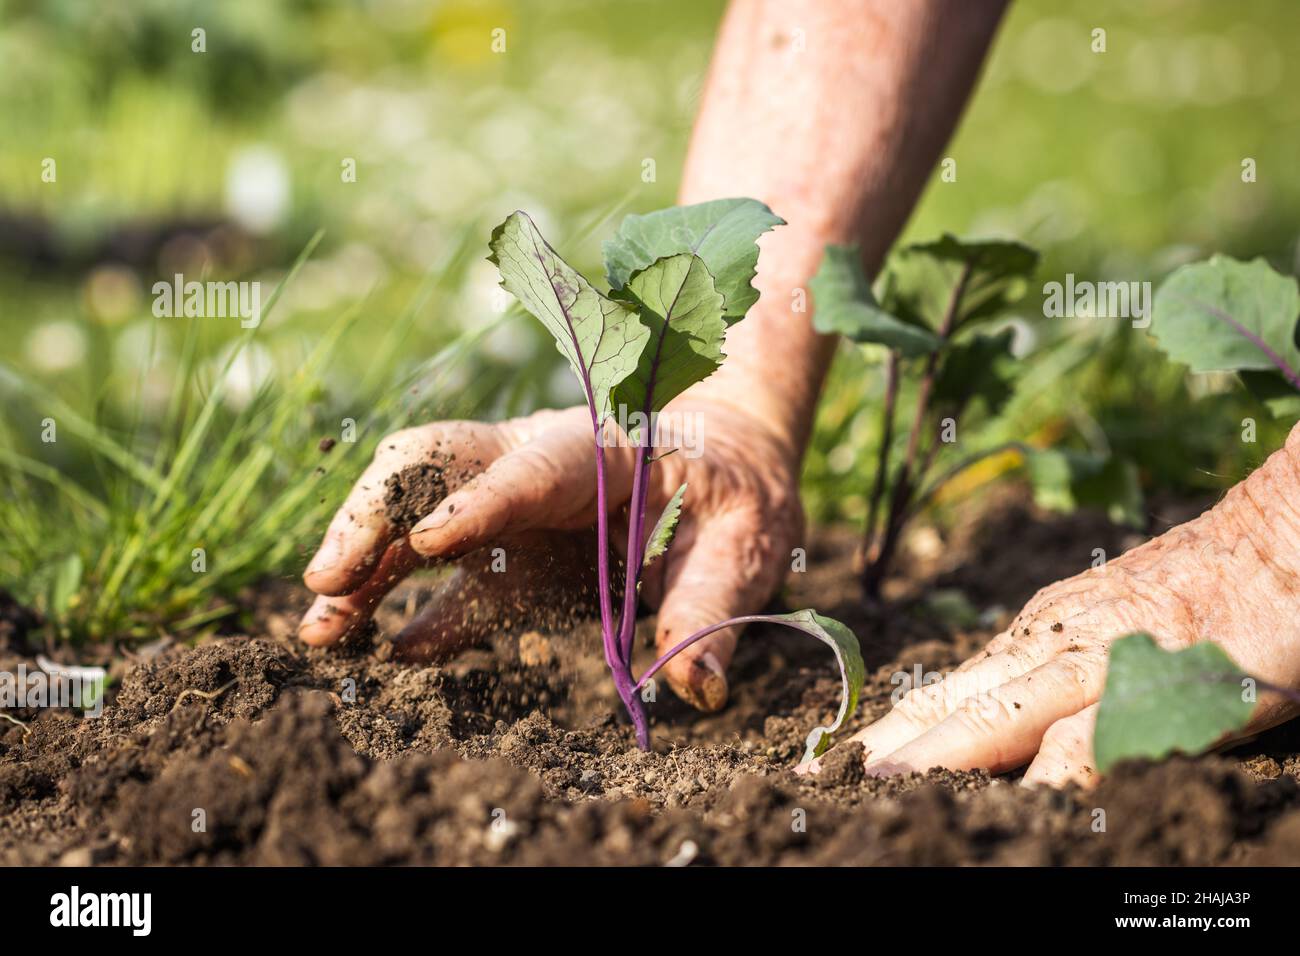 Planting kohlrabi seedling in organic garden. Gardening at spring. Farmer hands working in vegetable bed. Selective focus and motion Stock Photo